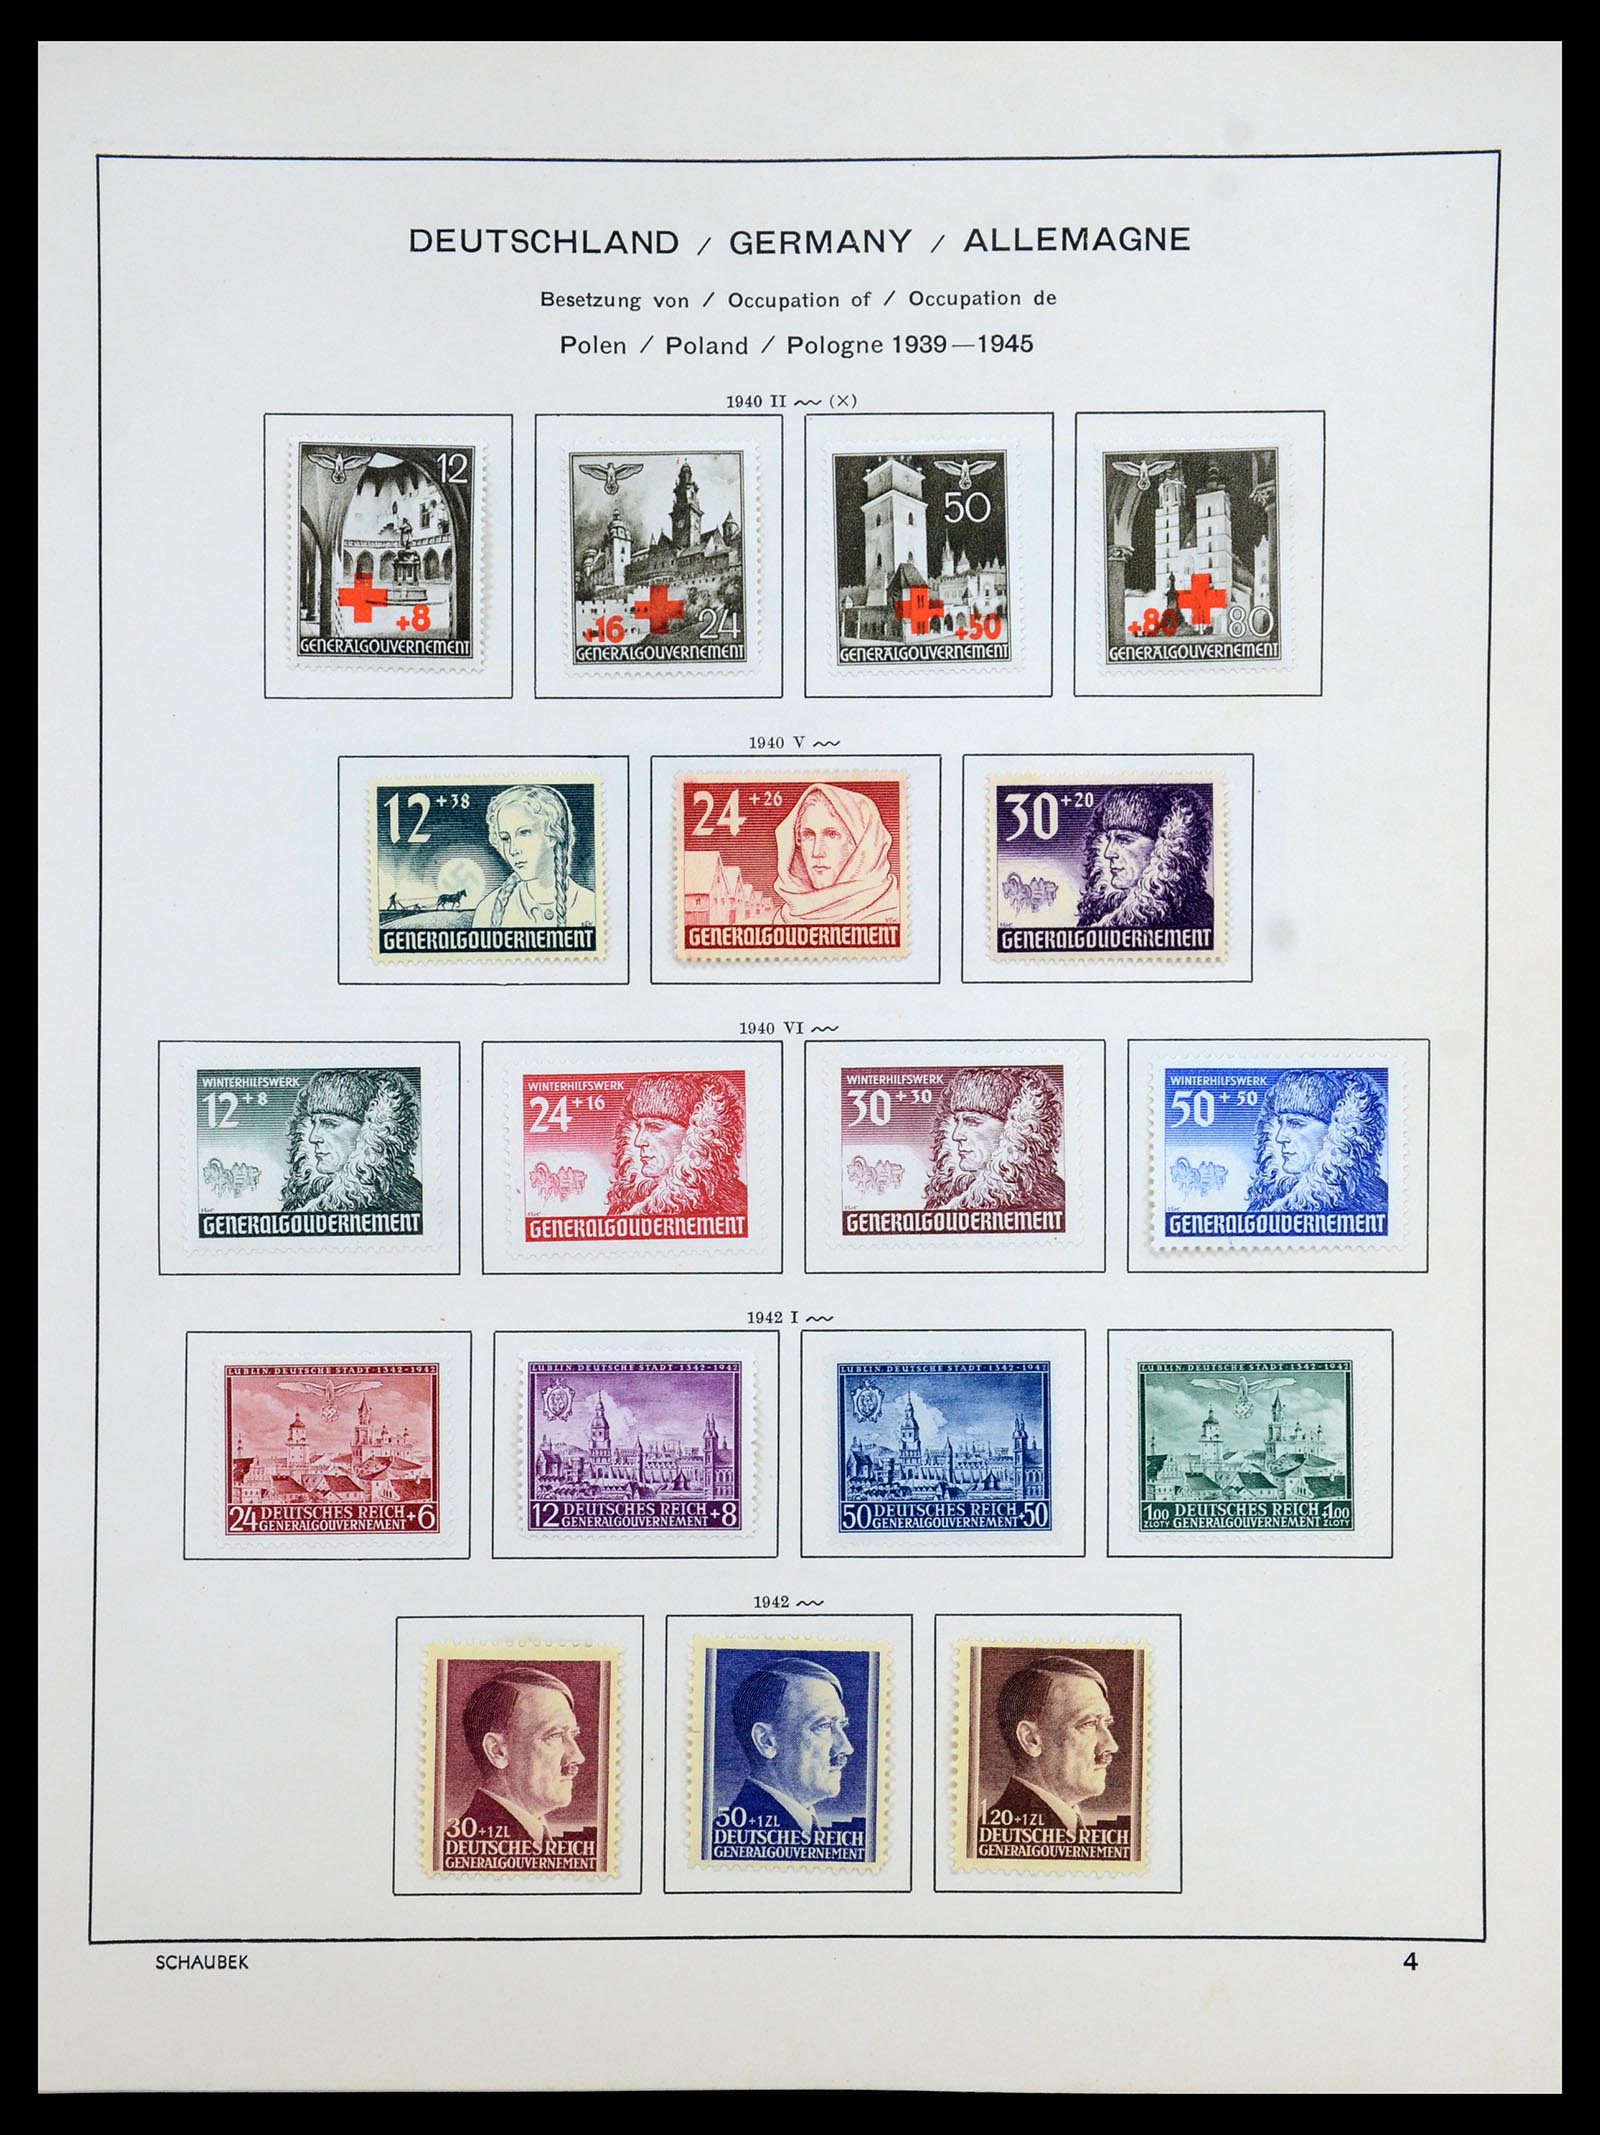 35964 012 - Stamp collection 35964 Germany occupations WW II 1939-1945.